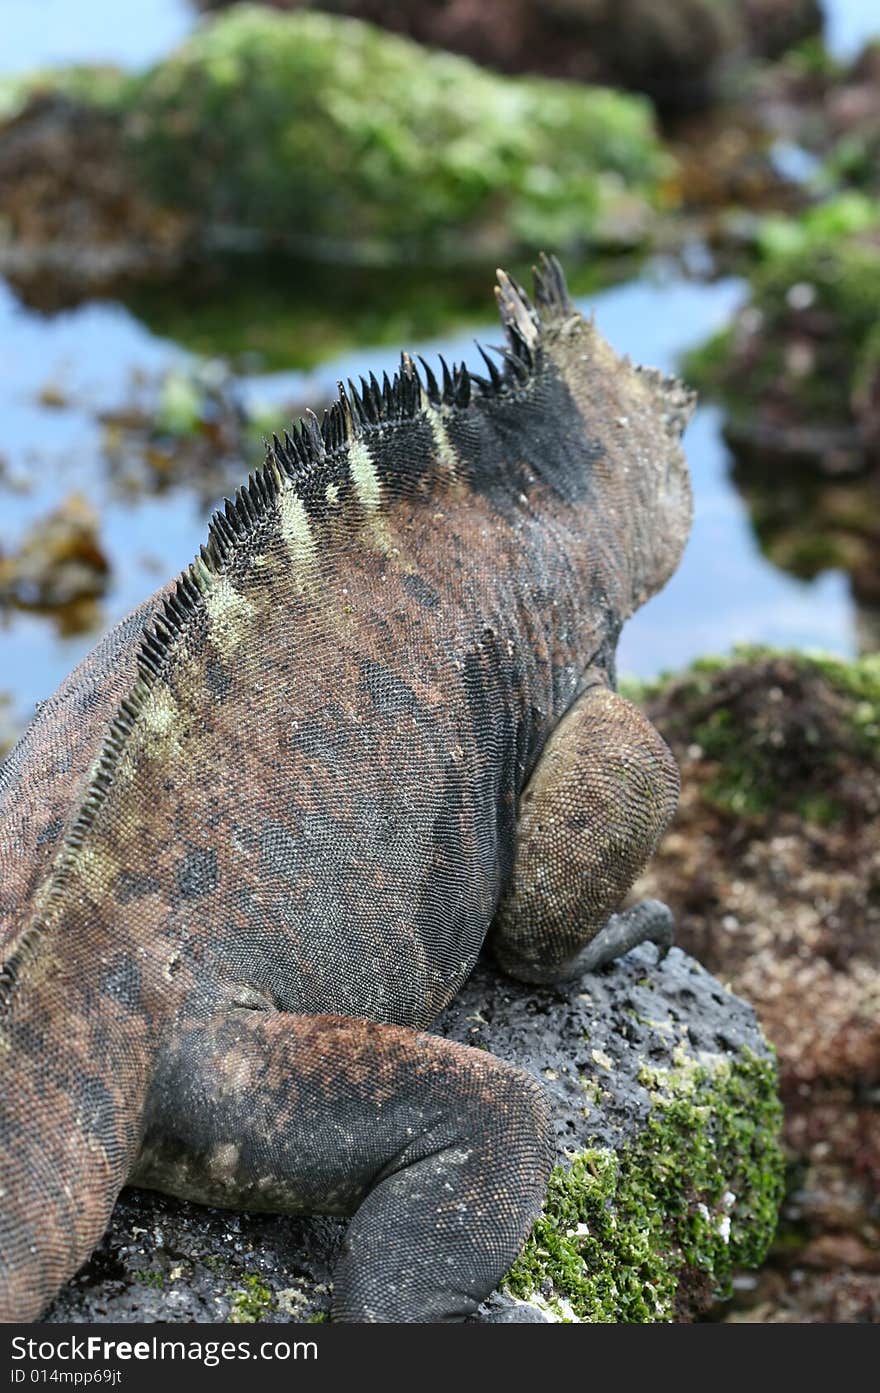 A marine iguana looks out on the tidal pools that are common on the shores of the galapagos islands in Ecuador